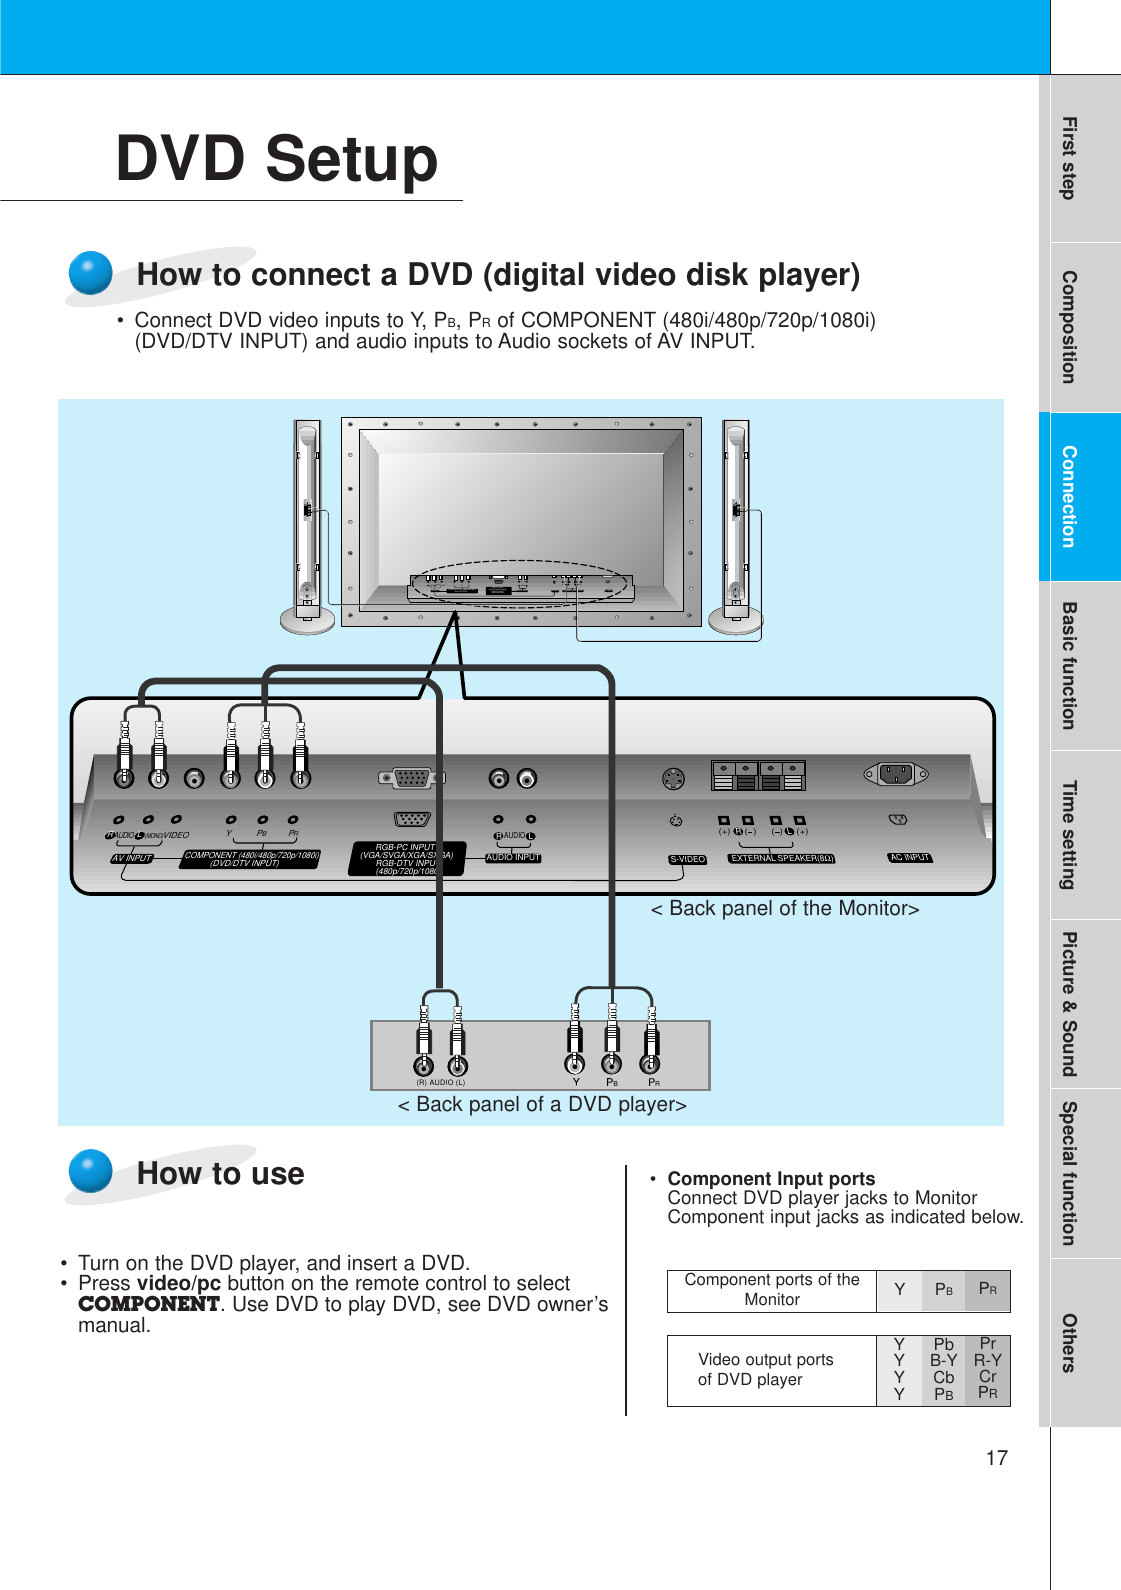 17First step Composition Connection Basic function Time setting Picture &amp; Sound Special function OthersDVD Setup• Connect DVD video inputs to Y, PB, PRof COMPONENT (480i/480p/720p/1080i)(DVD/DTV INPUT) and audio inputs to Audio sockets of AV INPUT.How to connect a DVD (digital video disk player)How to use• Turn on the DVD player, and insert a DVD.• Press video/pc button on the remote control to selectCOMPONENT. Use DVD to play DVD, see DVD owner’smanual.•Component Input portsConnect DVD player jacks to MonitorComponent input jacks as indicated below.(+) (  ) (+)(  )AUDIO(MONO)R L VIDEO Y PB RPAV INPUTAUDIOR L RLEXTERNAL SPEAKER (8Ω) AC INPUTAUDIO INPUT S-VIDEOCOMPONENT (480i/480p/720p/1080i) RGB-PC INPUT(VGA/SVGA/XGA/SXGA)RGB-DTV INPUT(480p/720p/1080i)(DVD/DTV INPUT)(+) (  ) (+)(  )AUDIO(MONO)R LAV INPUTCOMPONENT (480i/480p/720p/1080i)(DVD/DTV INPUT)RGB-PC INPUTRAUDIO INPUTS-VIDEOEXTERNAL SPEAKER(8Ω)R LAC INPUTLAUDIO(VGA/SVGA/XGA/SXGA)RGB-DTV INPUT(480p/720p/1080i)VIDEO Y PBPRBR(R) AUDIO (L)&lt; Back panel of a DVD player&gt;Component ports of theMonitor YPBPRVideo output ports of DVD playerYYYYPbB-YCbPBPrR-YCrPR&lt; Back panel of the Monitor&gt;